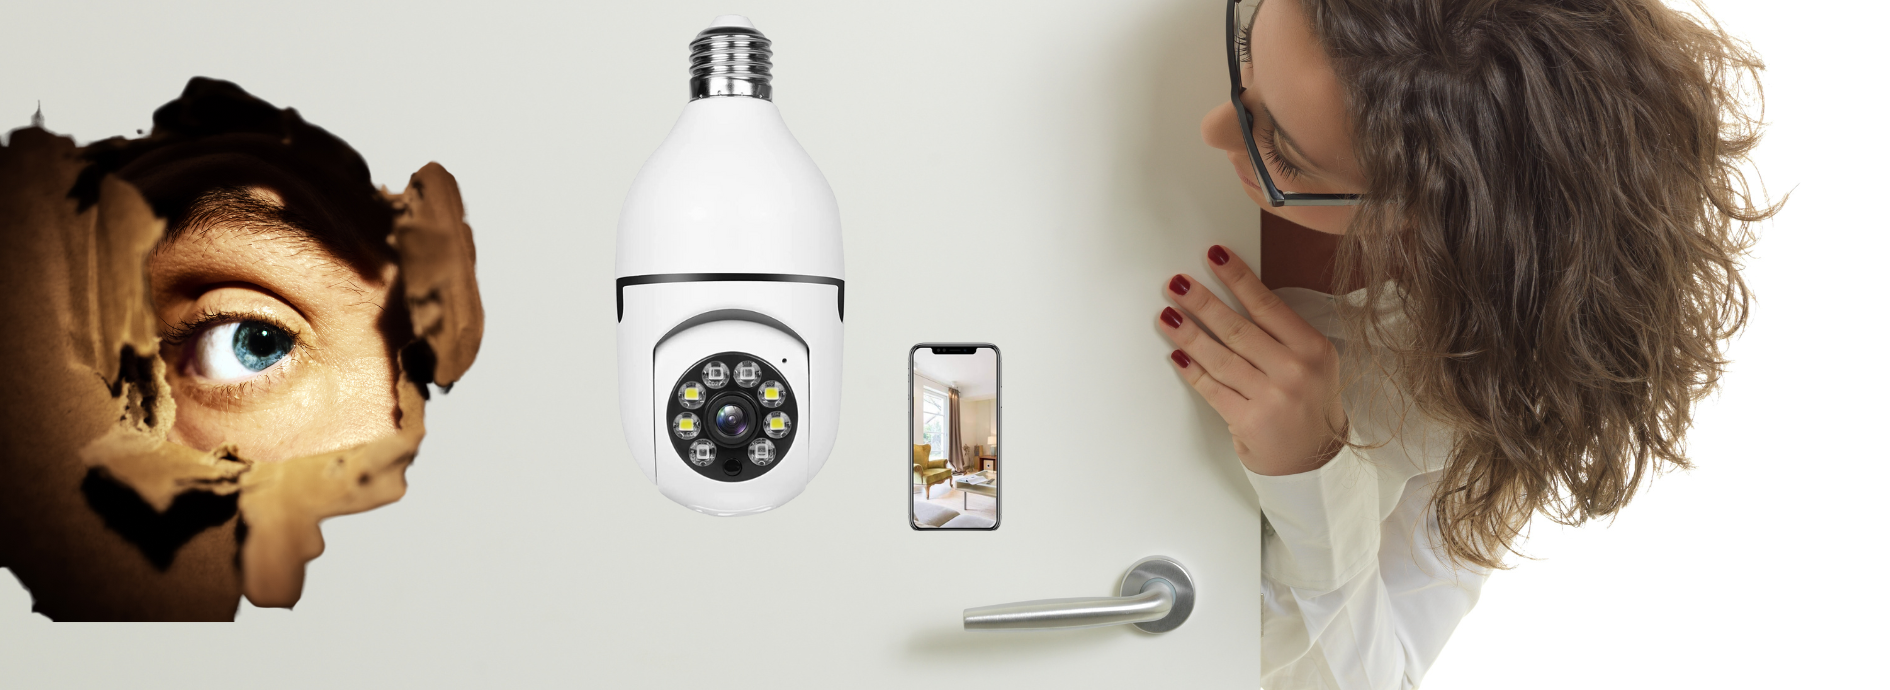 The E26 Light Bulb Camera Features, Applications complete Guide